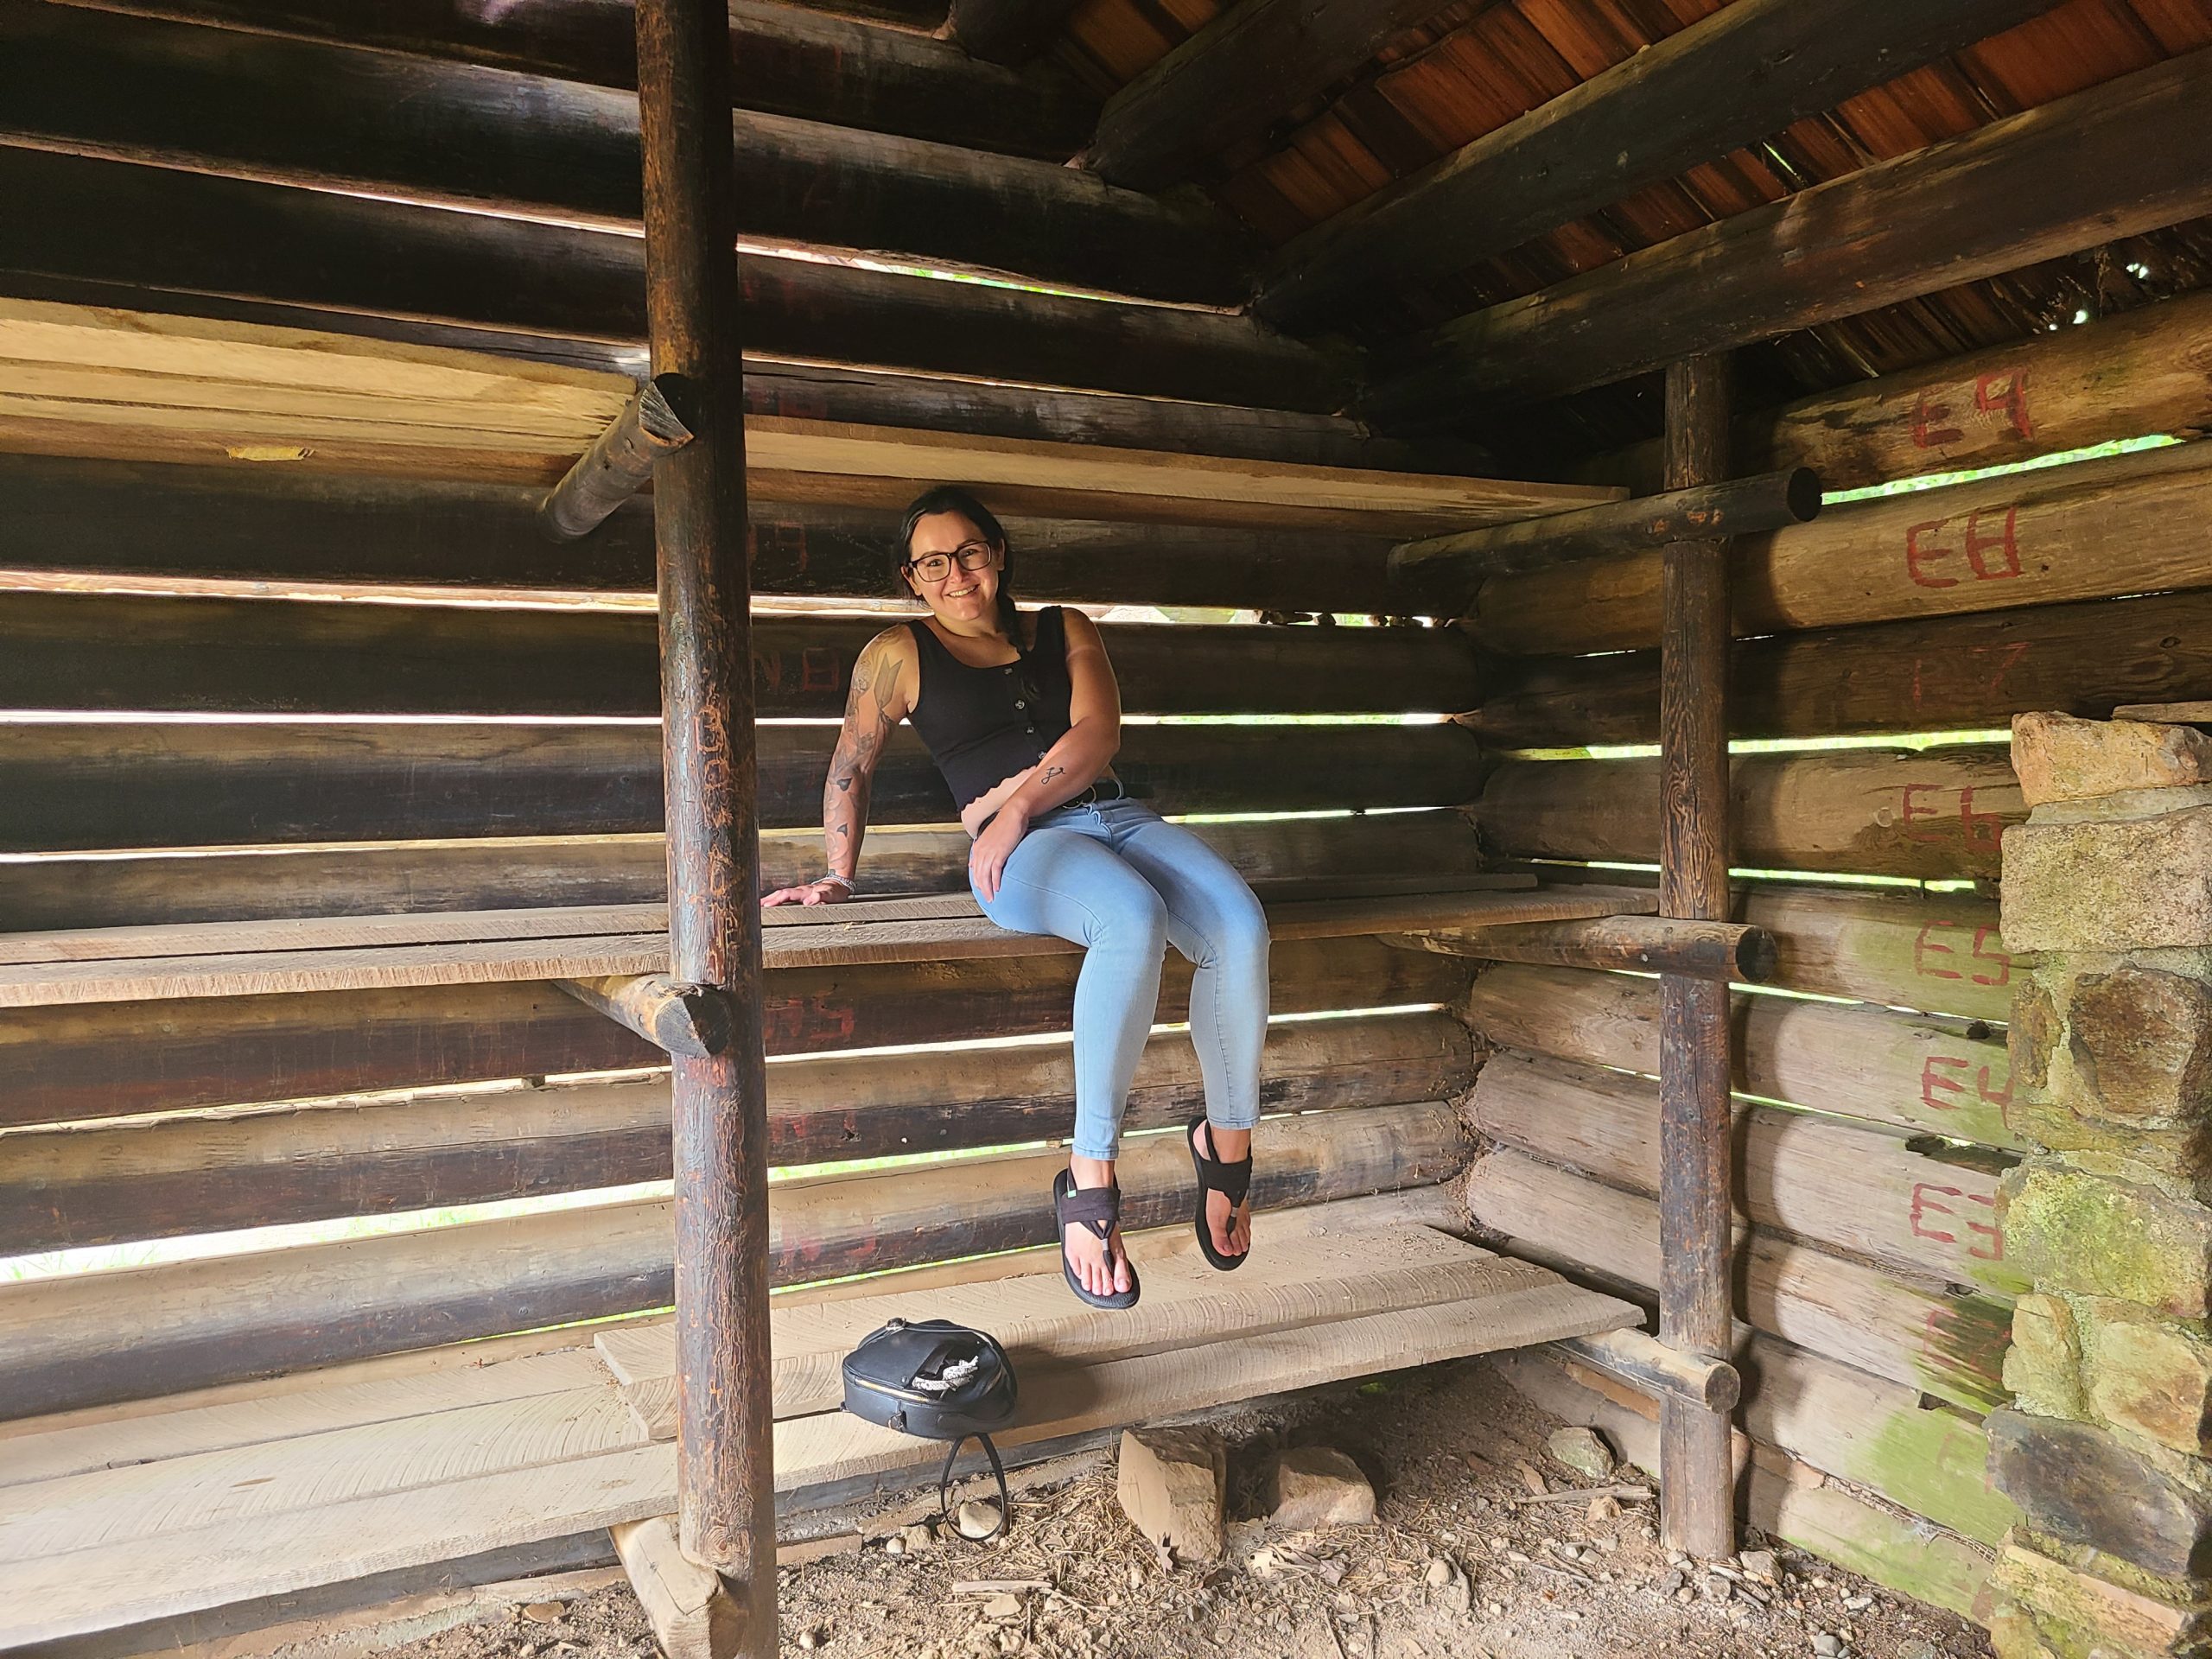 A woman sits on a wooden plank bed inside a wooden cabin